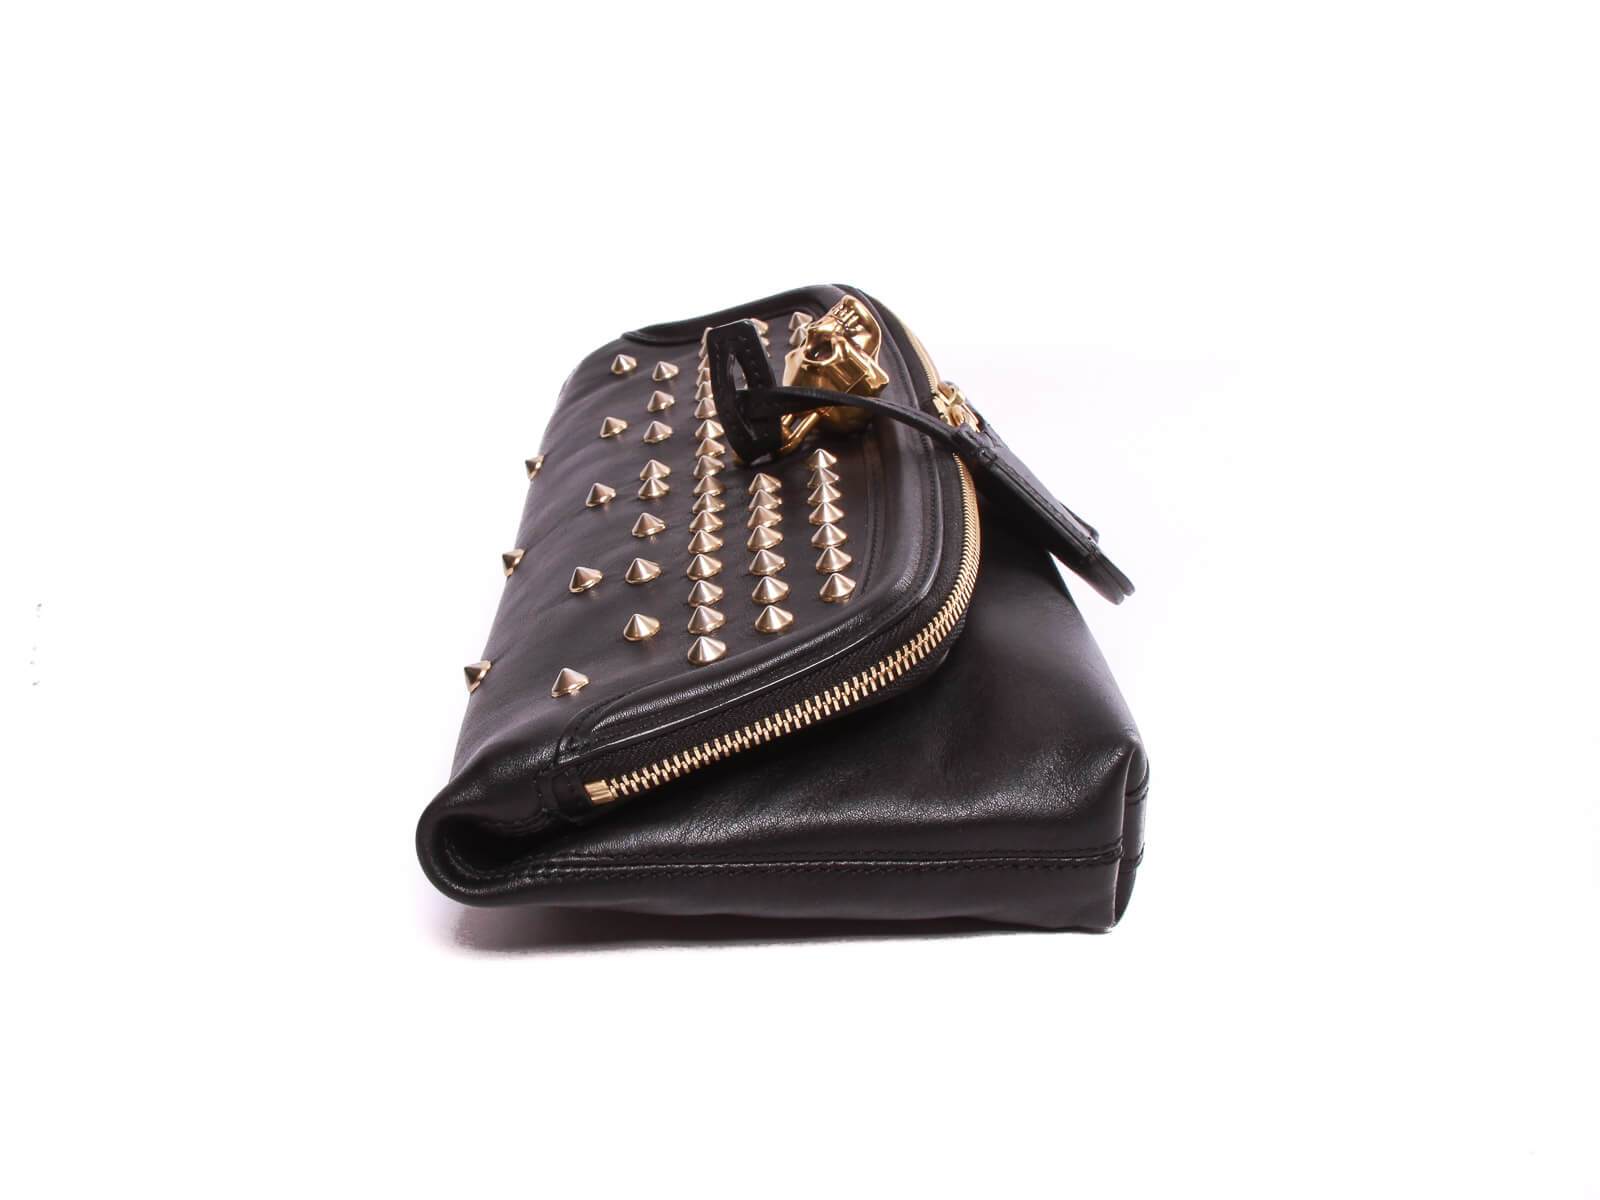 Sold at Auction: Alexander McQueen Skull Padlock Fold-Over Clutch